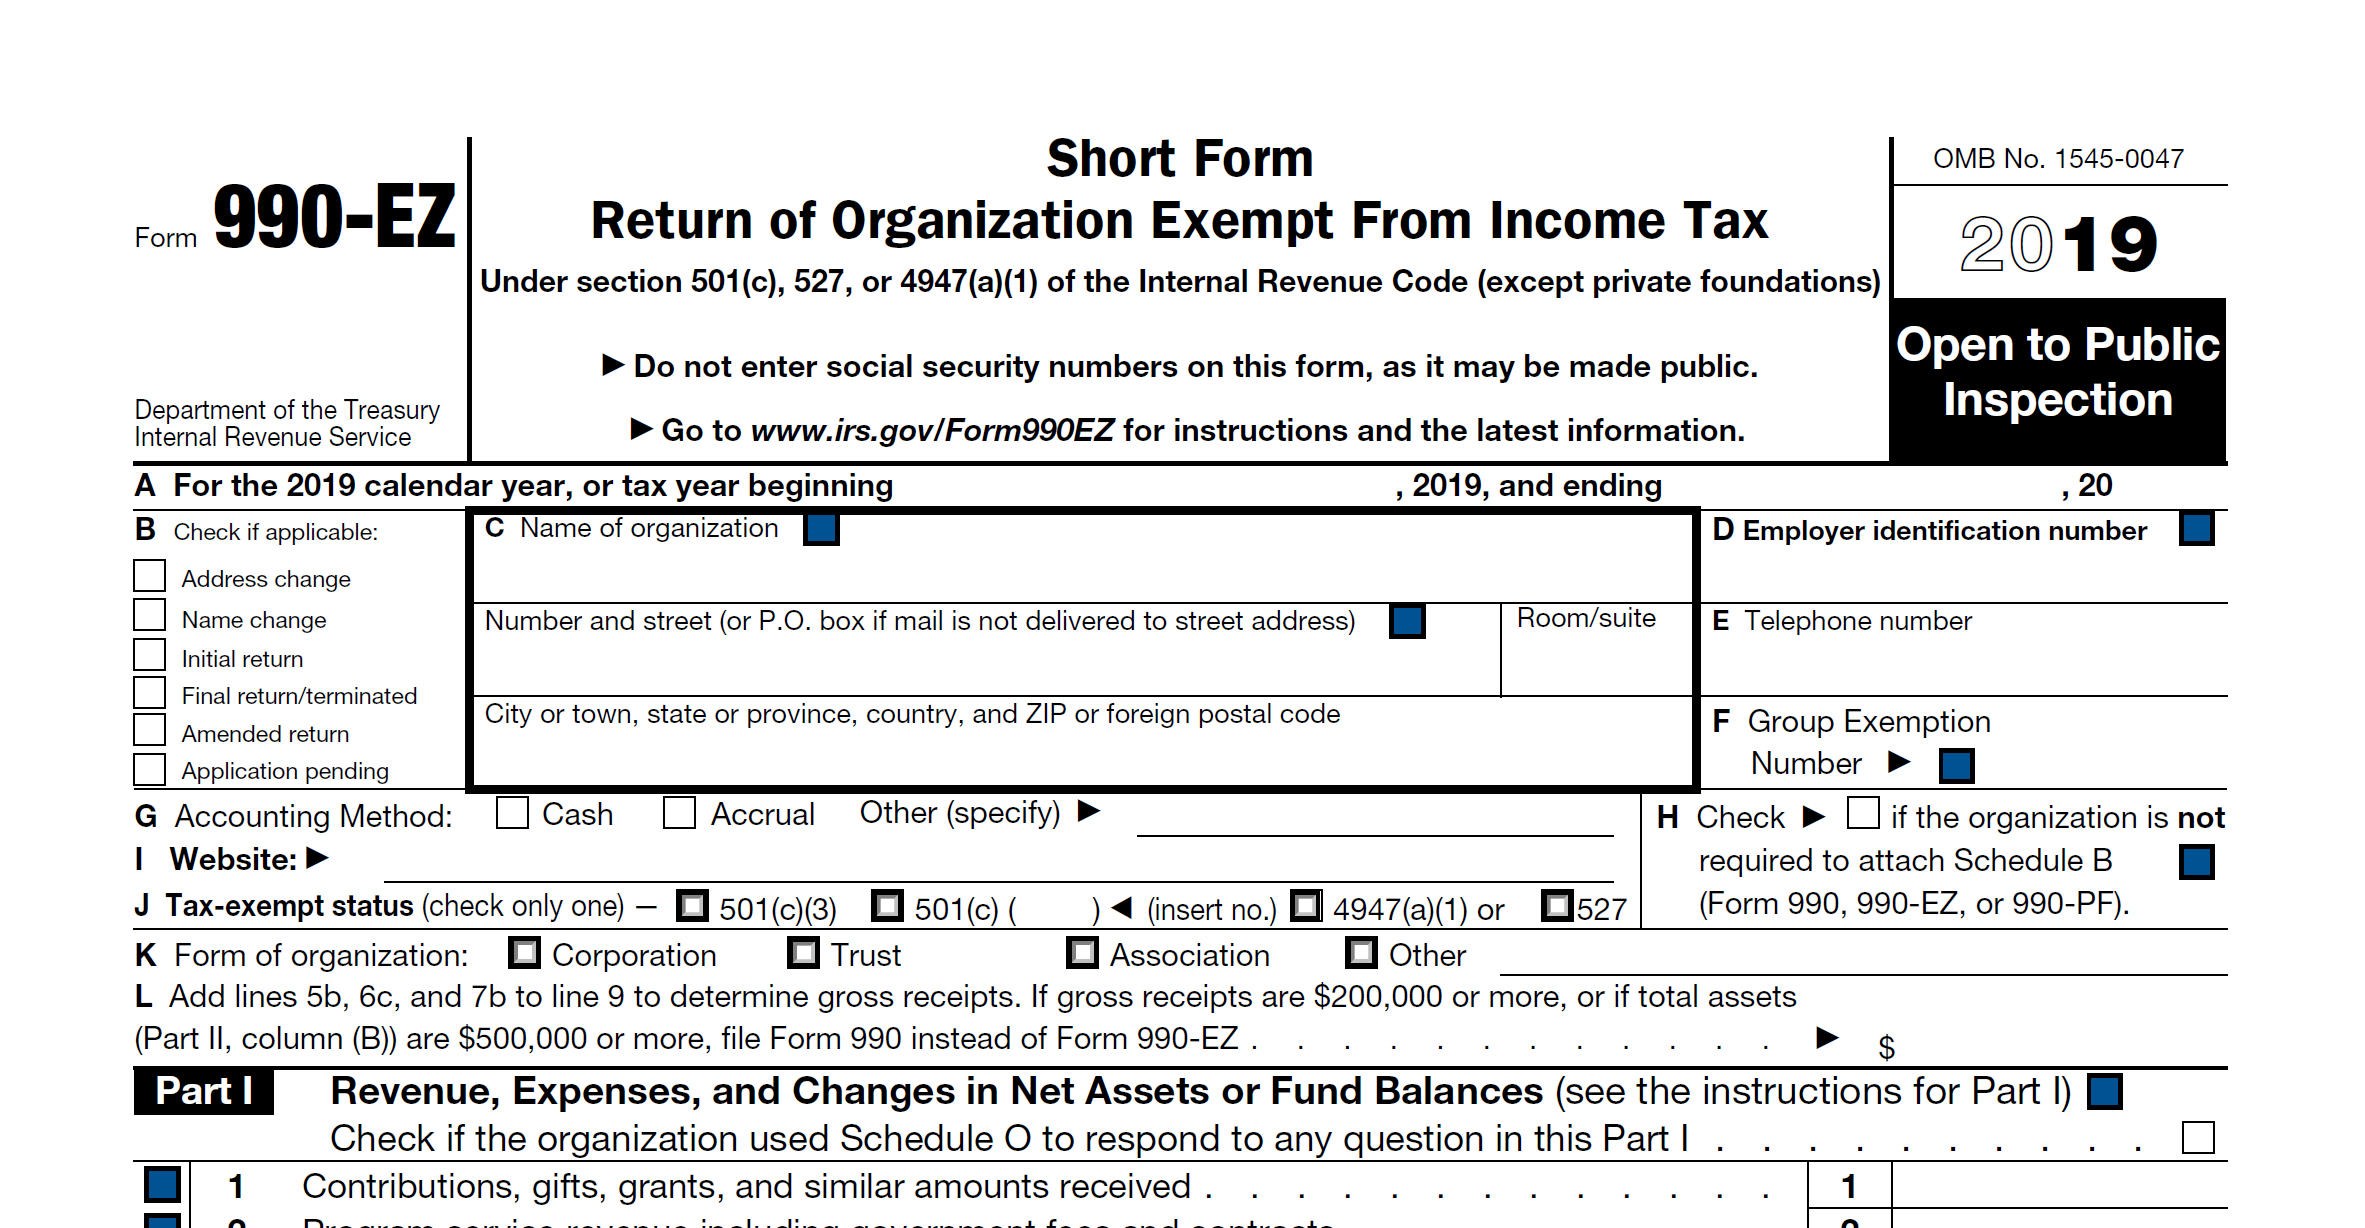 Form 990-EZ: Short Form Return of Organization Exempt From Income Tax